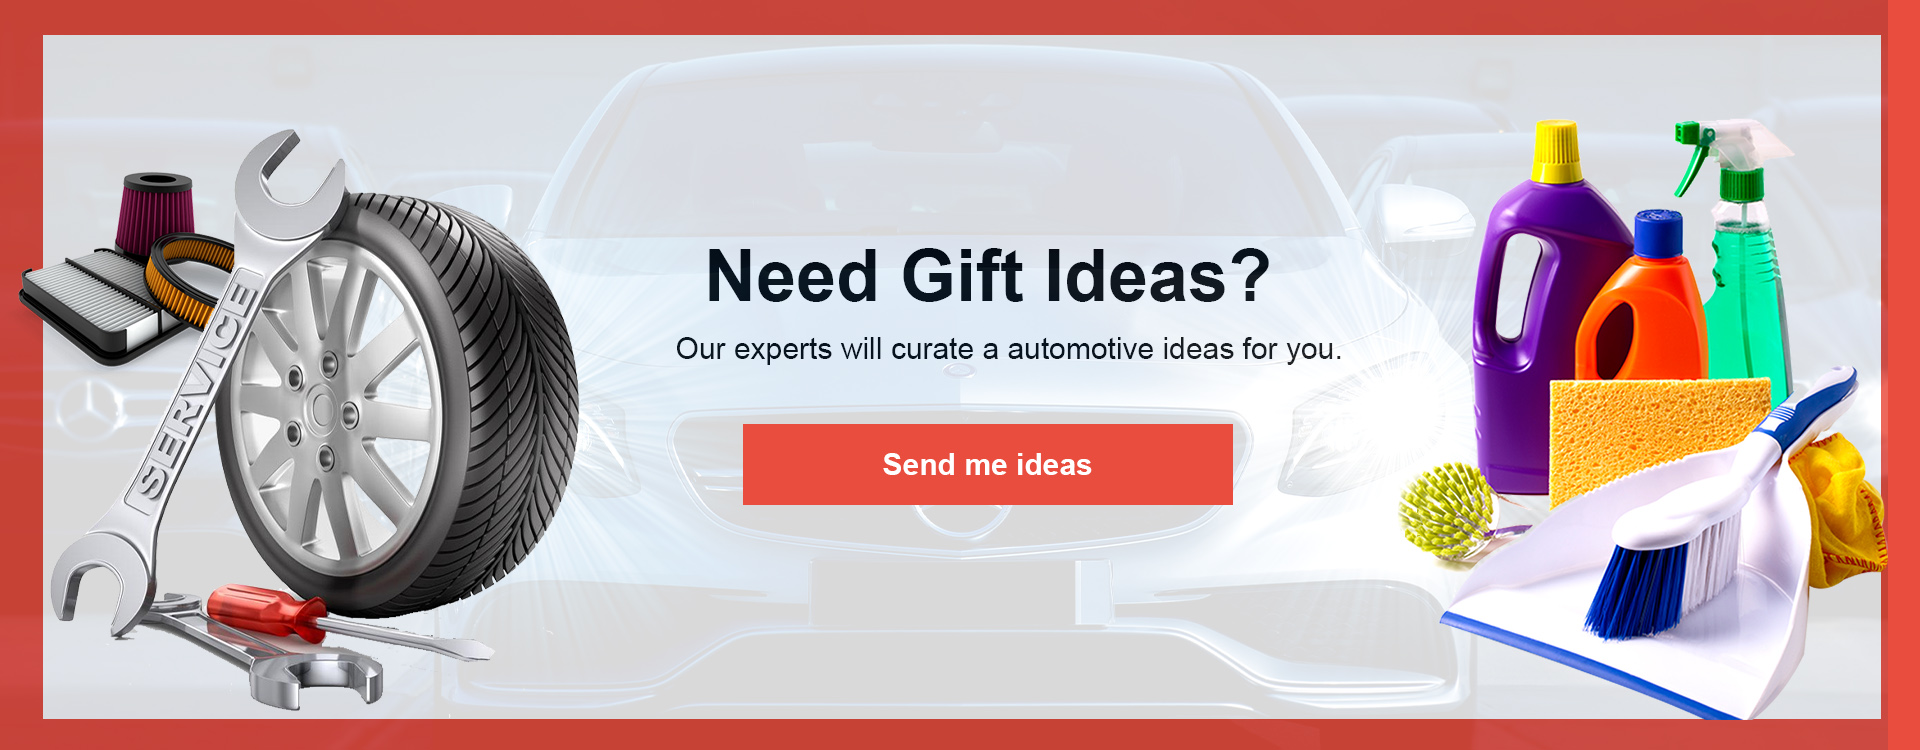 Custom Automotive Industry Gifts | Drive Brand Success